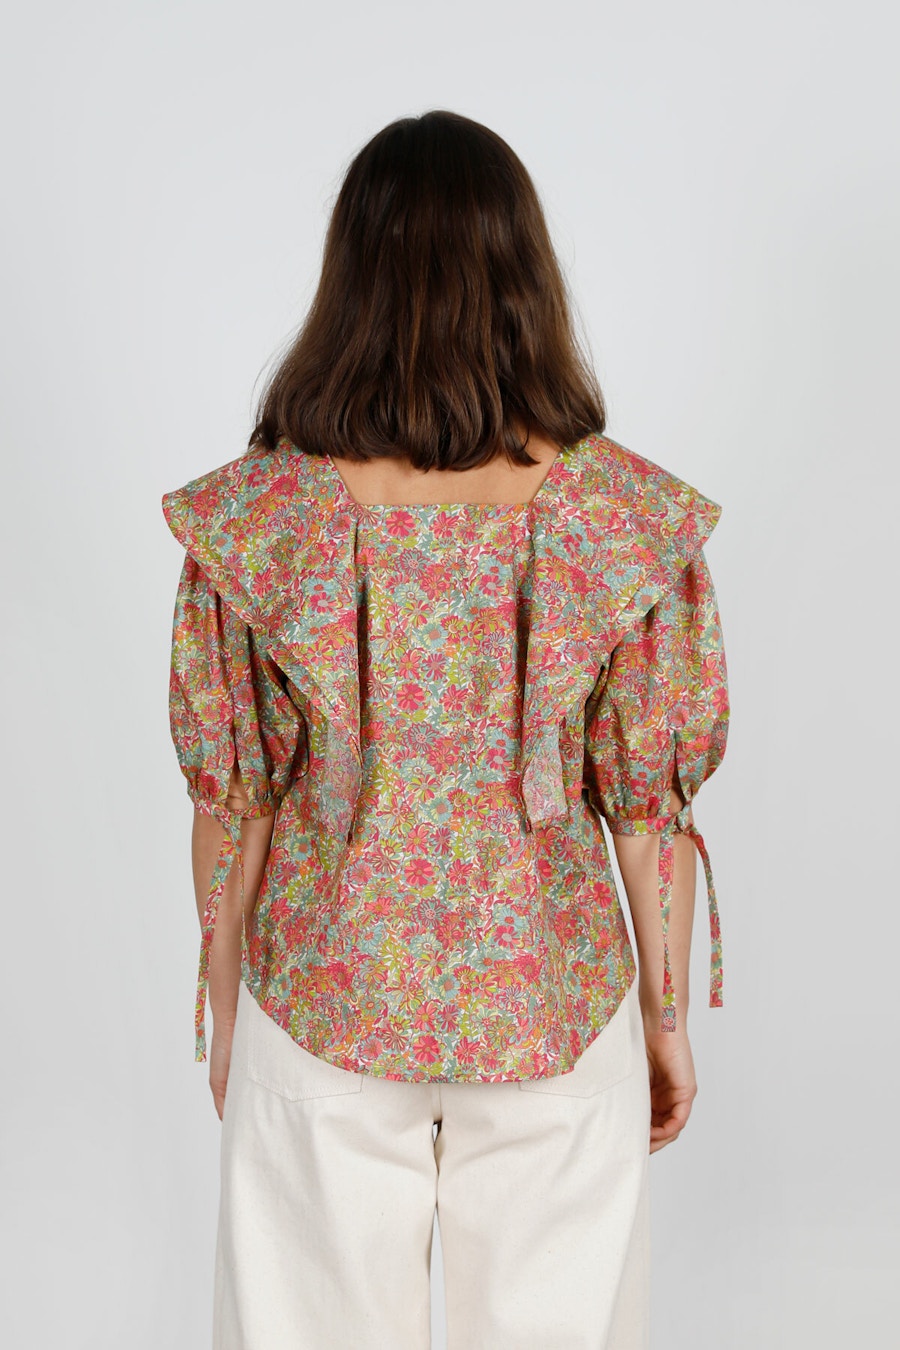 Back Lysimaque Paqerette Blouse Liberty Tana Lawn The Fabric Store